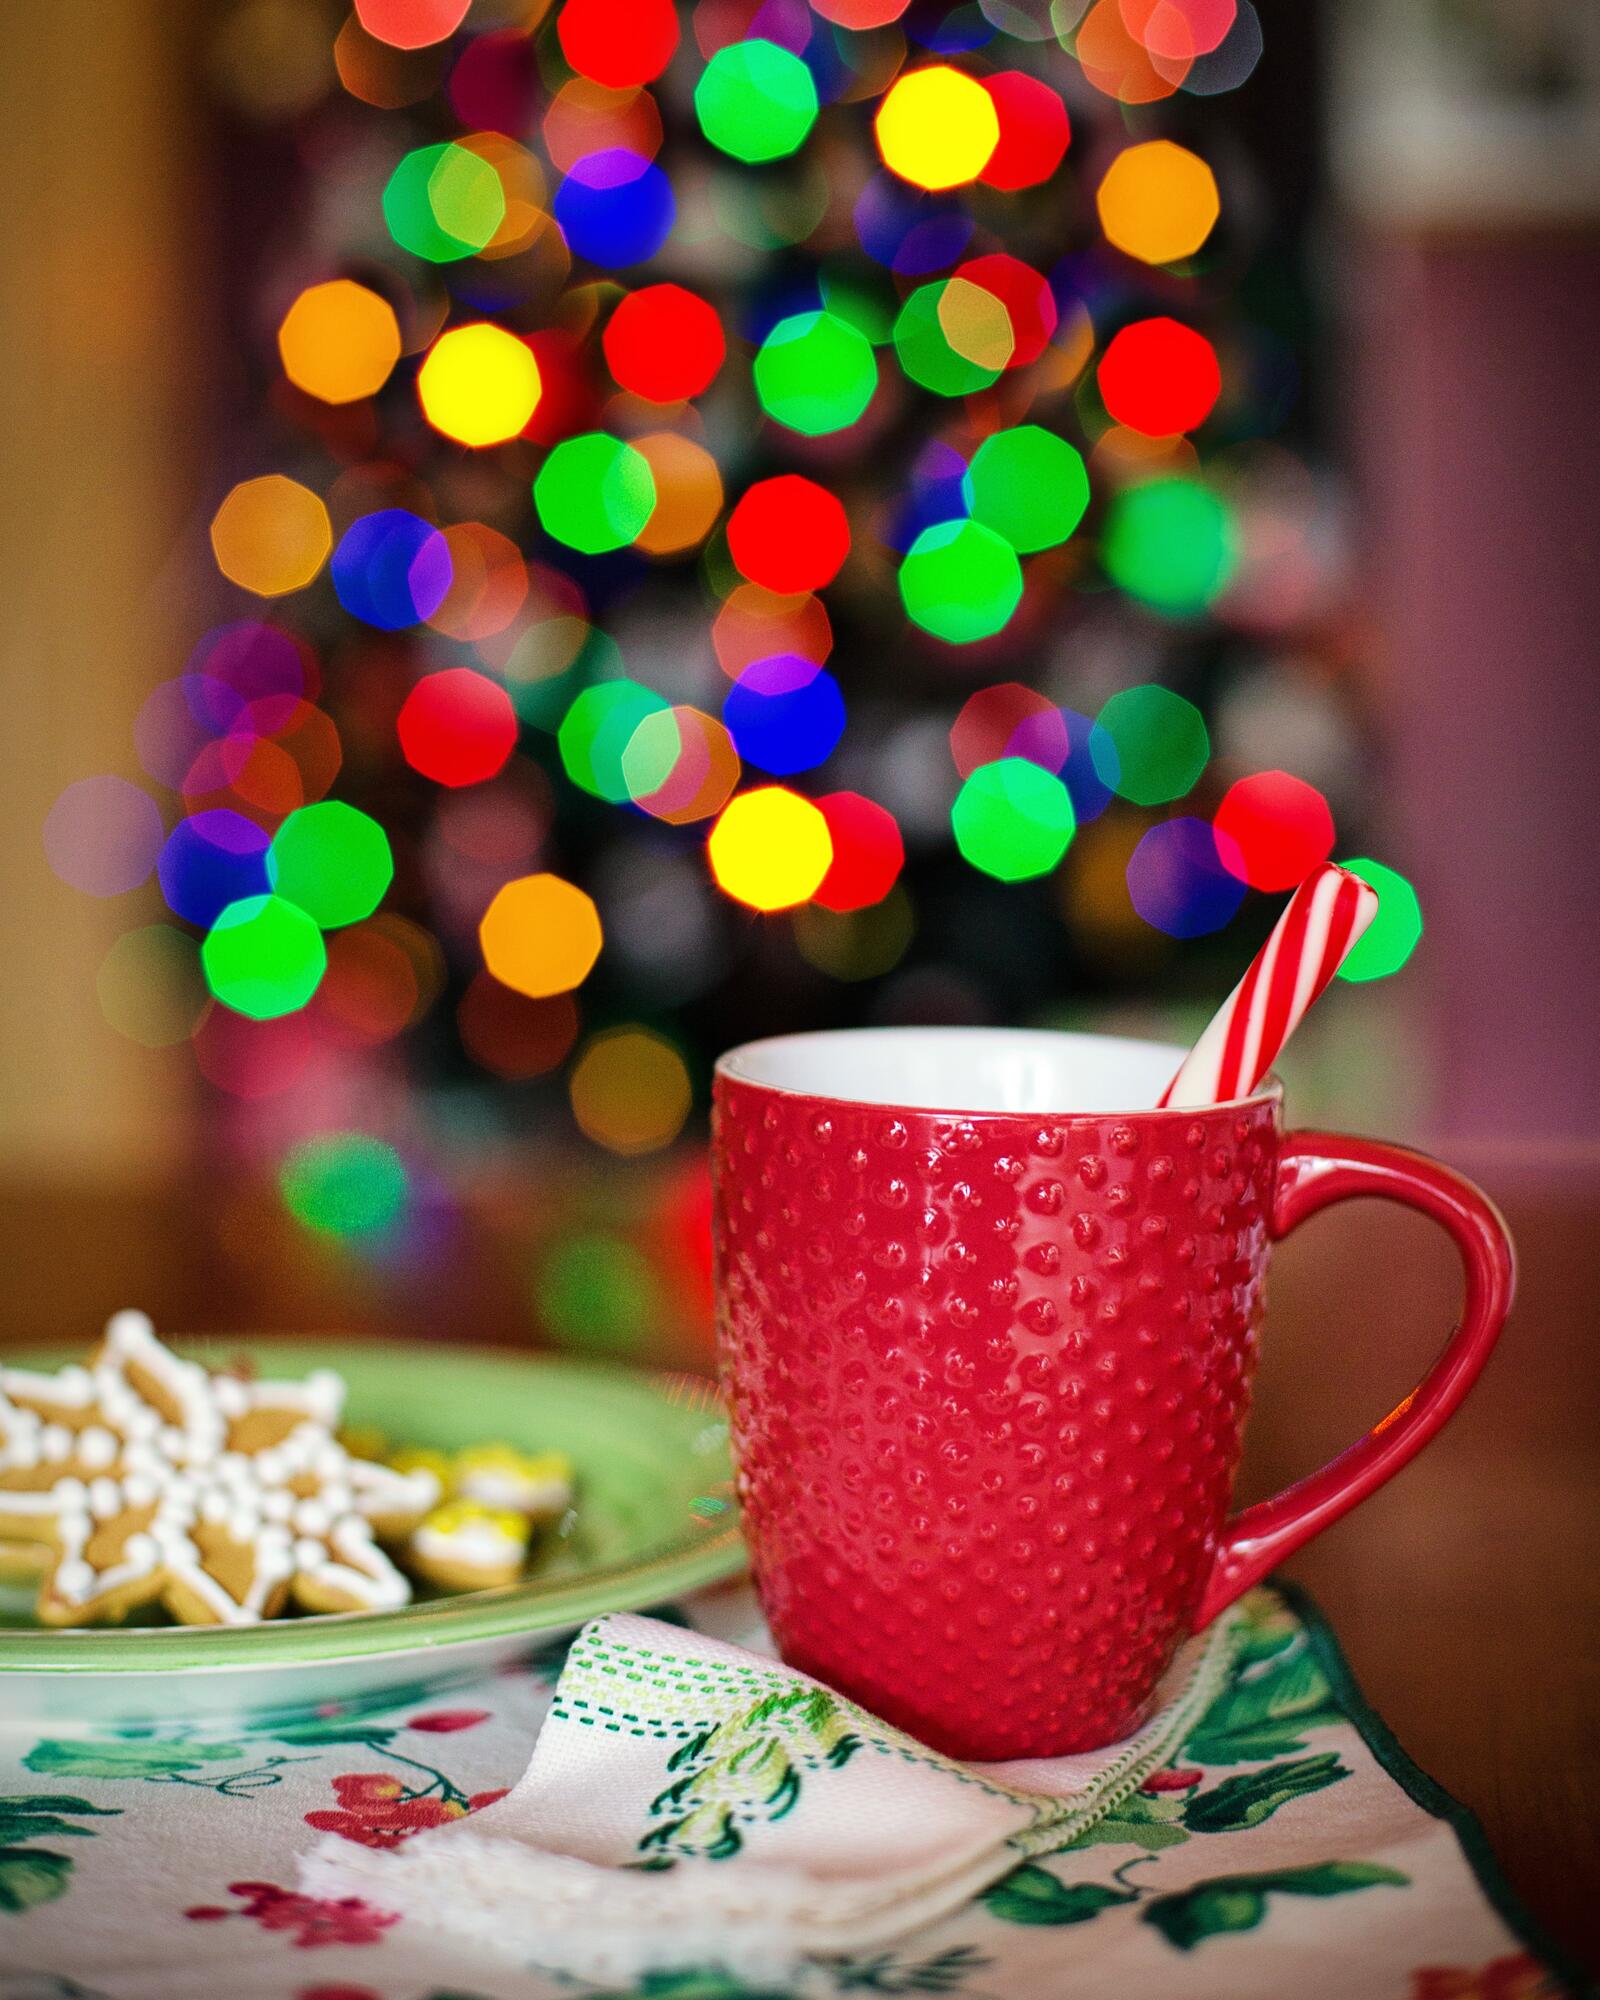 Free photo New Year`s mug in red color with yummy treats